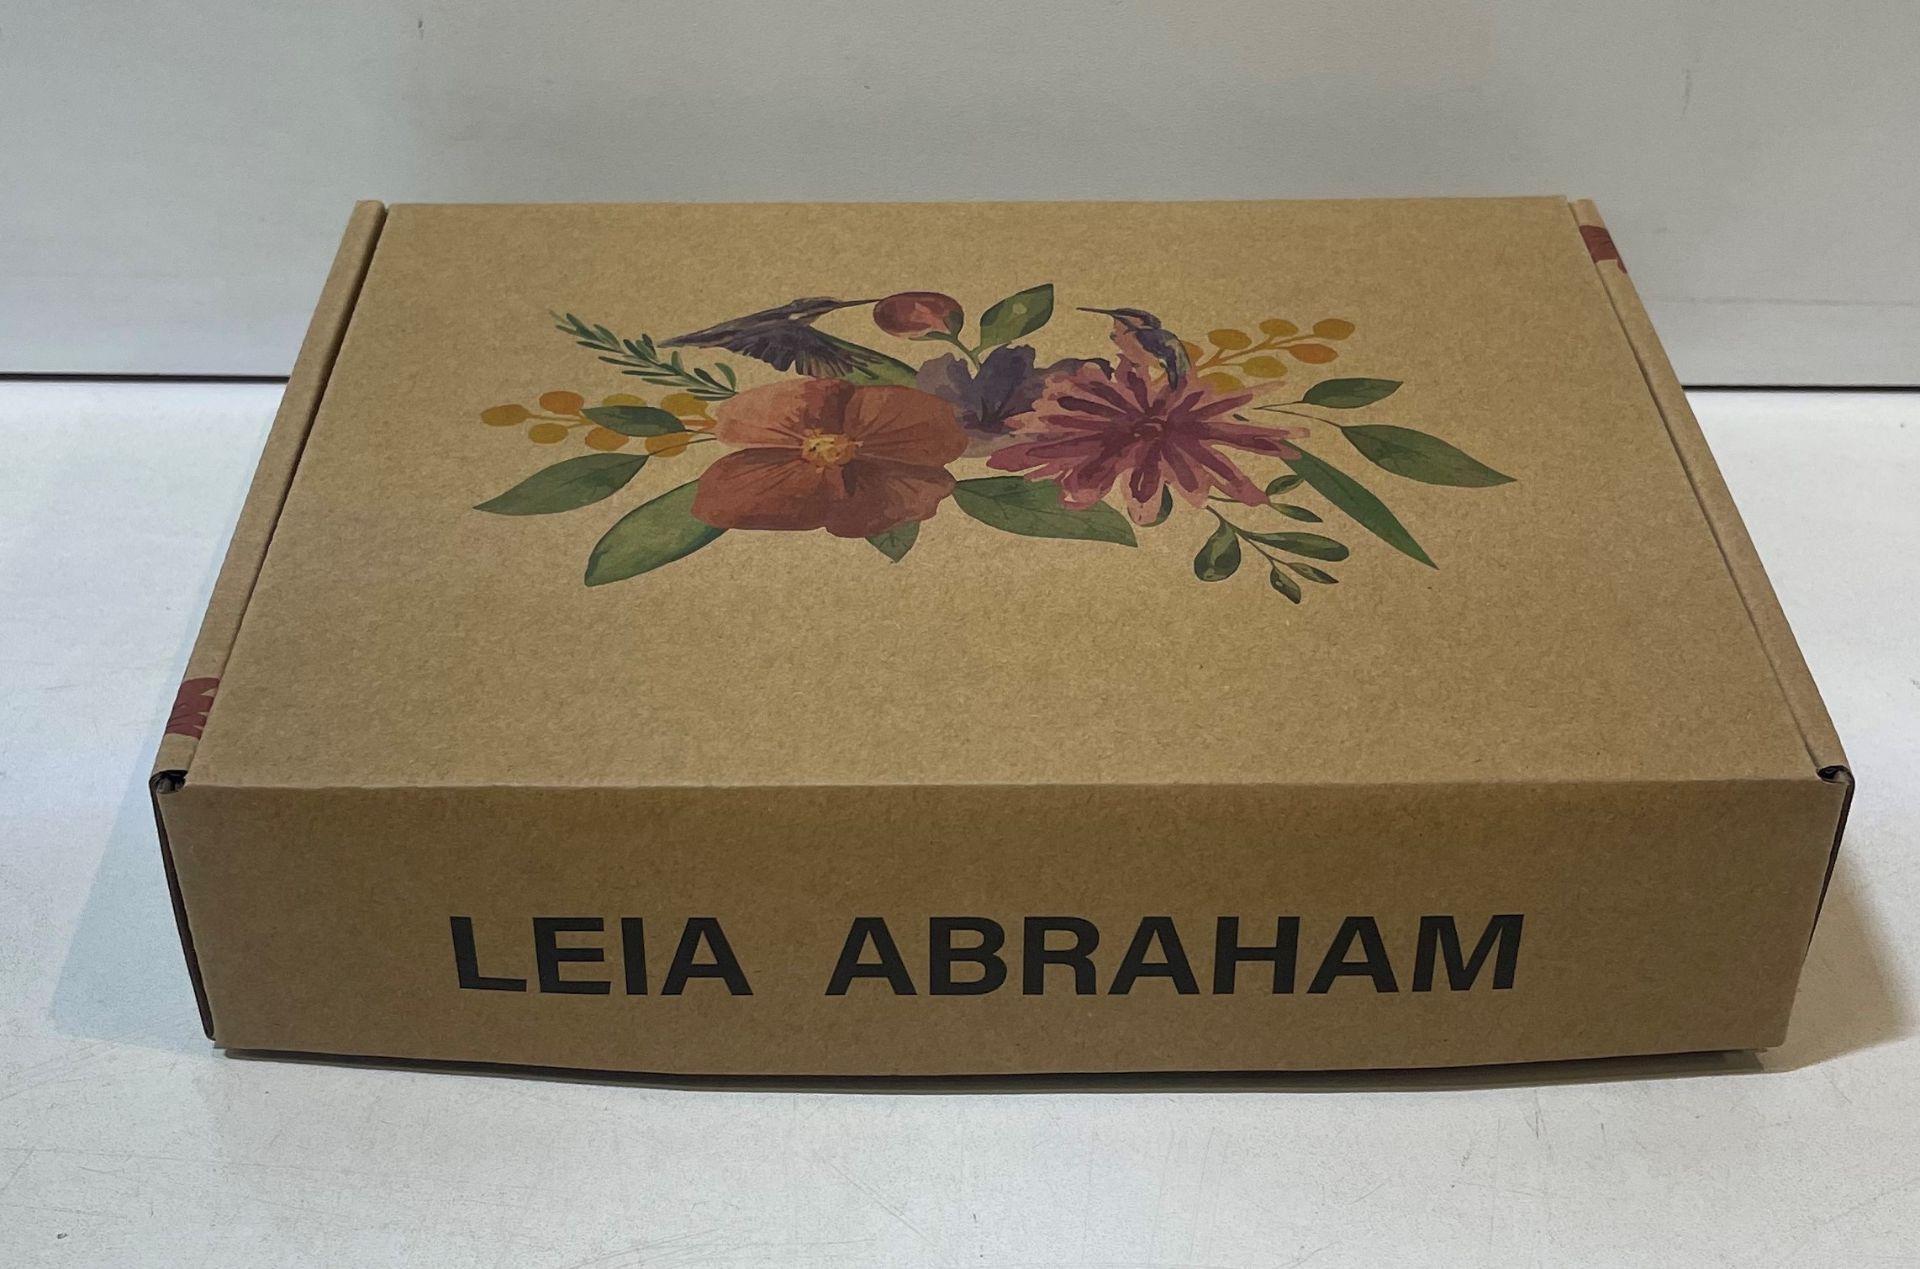 Gift Boxes for Her | 3 Sizes Small, Medium, Large | For Quantities and Contents see Description - Image 28 of 36